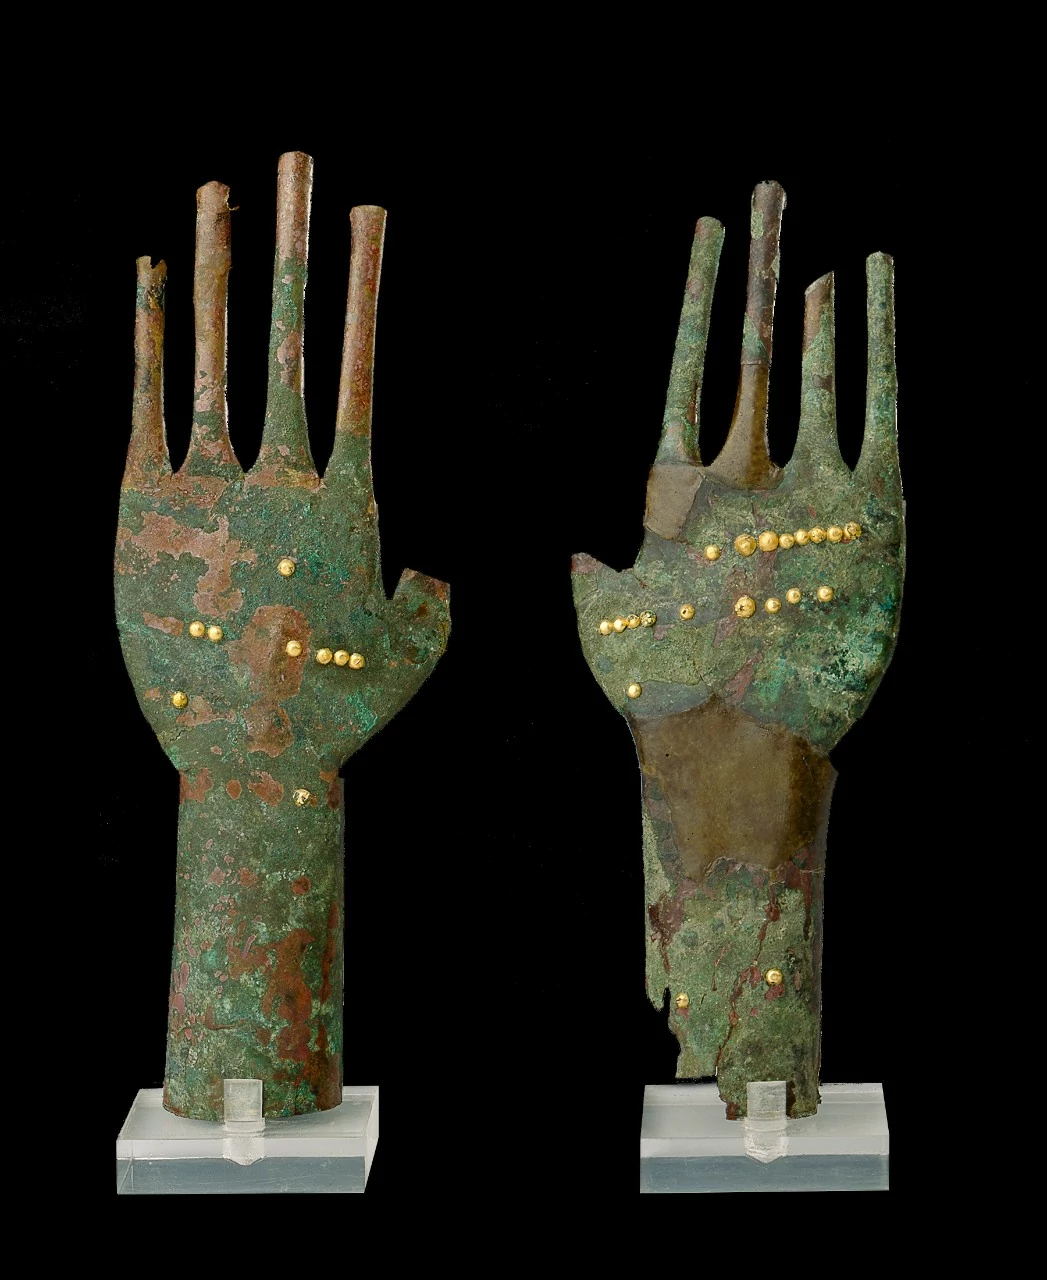 Pair of Hands, The Etruscans